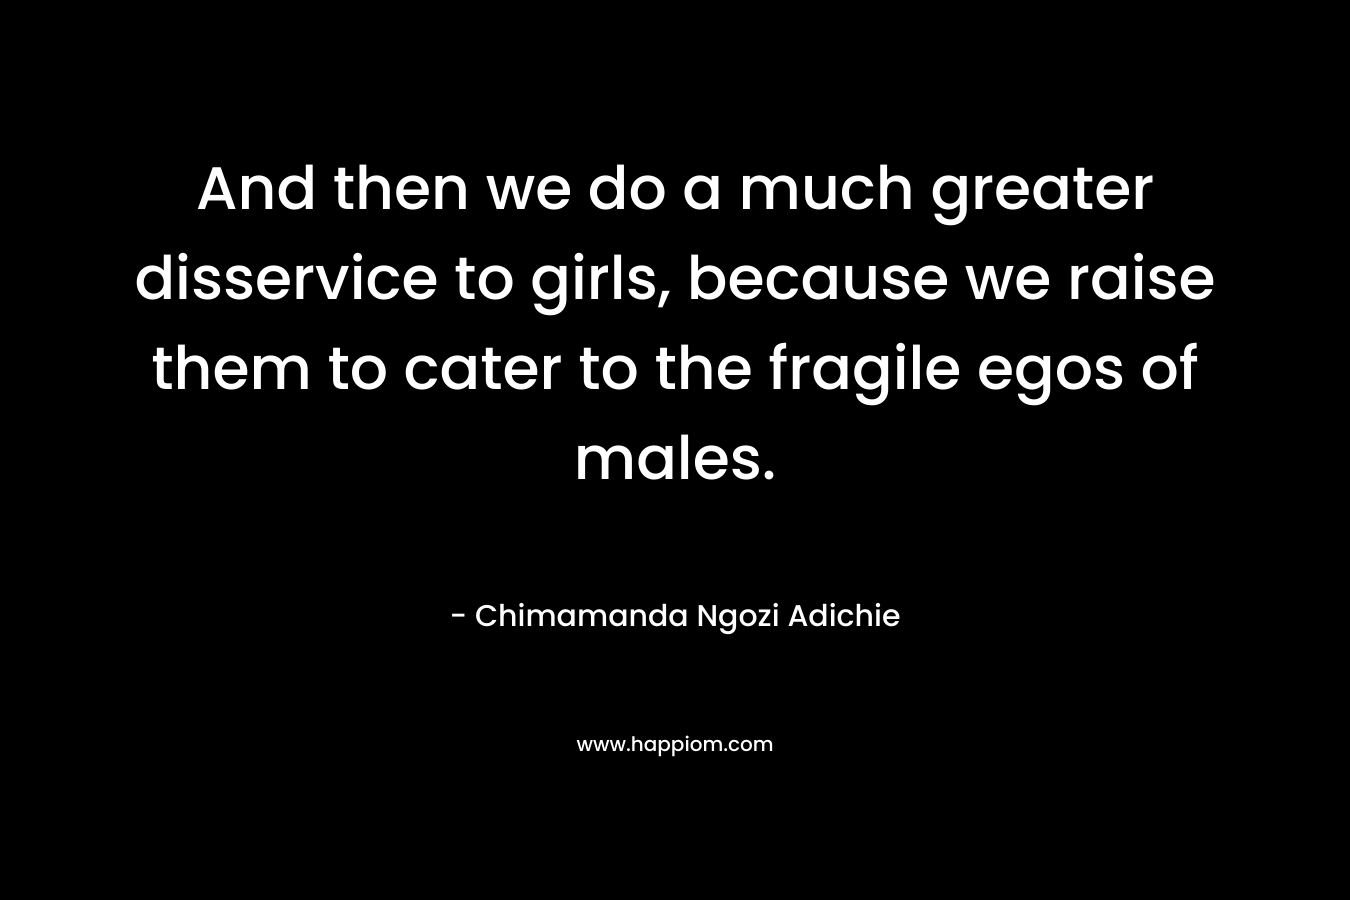 And then we do a much greater disservice to girls, because we raise them to cater to the fragile egos of males. – Chimamanda Ngozi Adichie